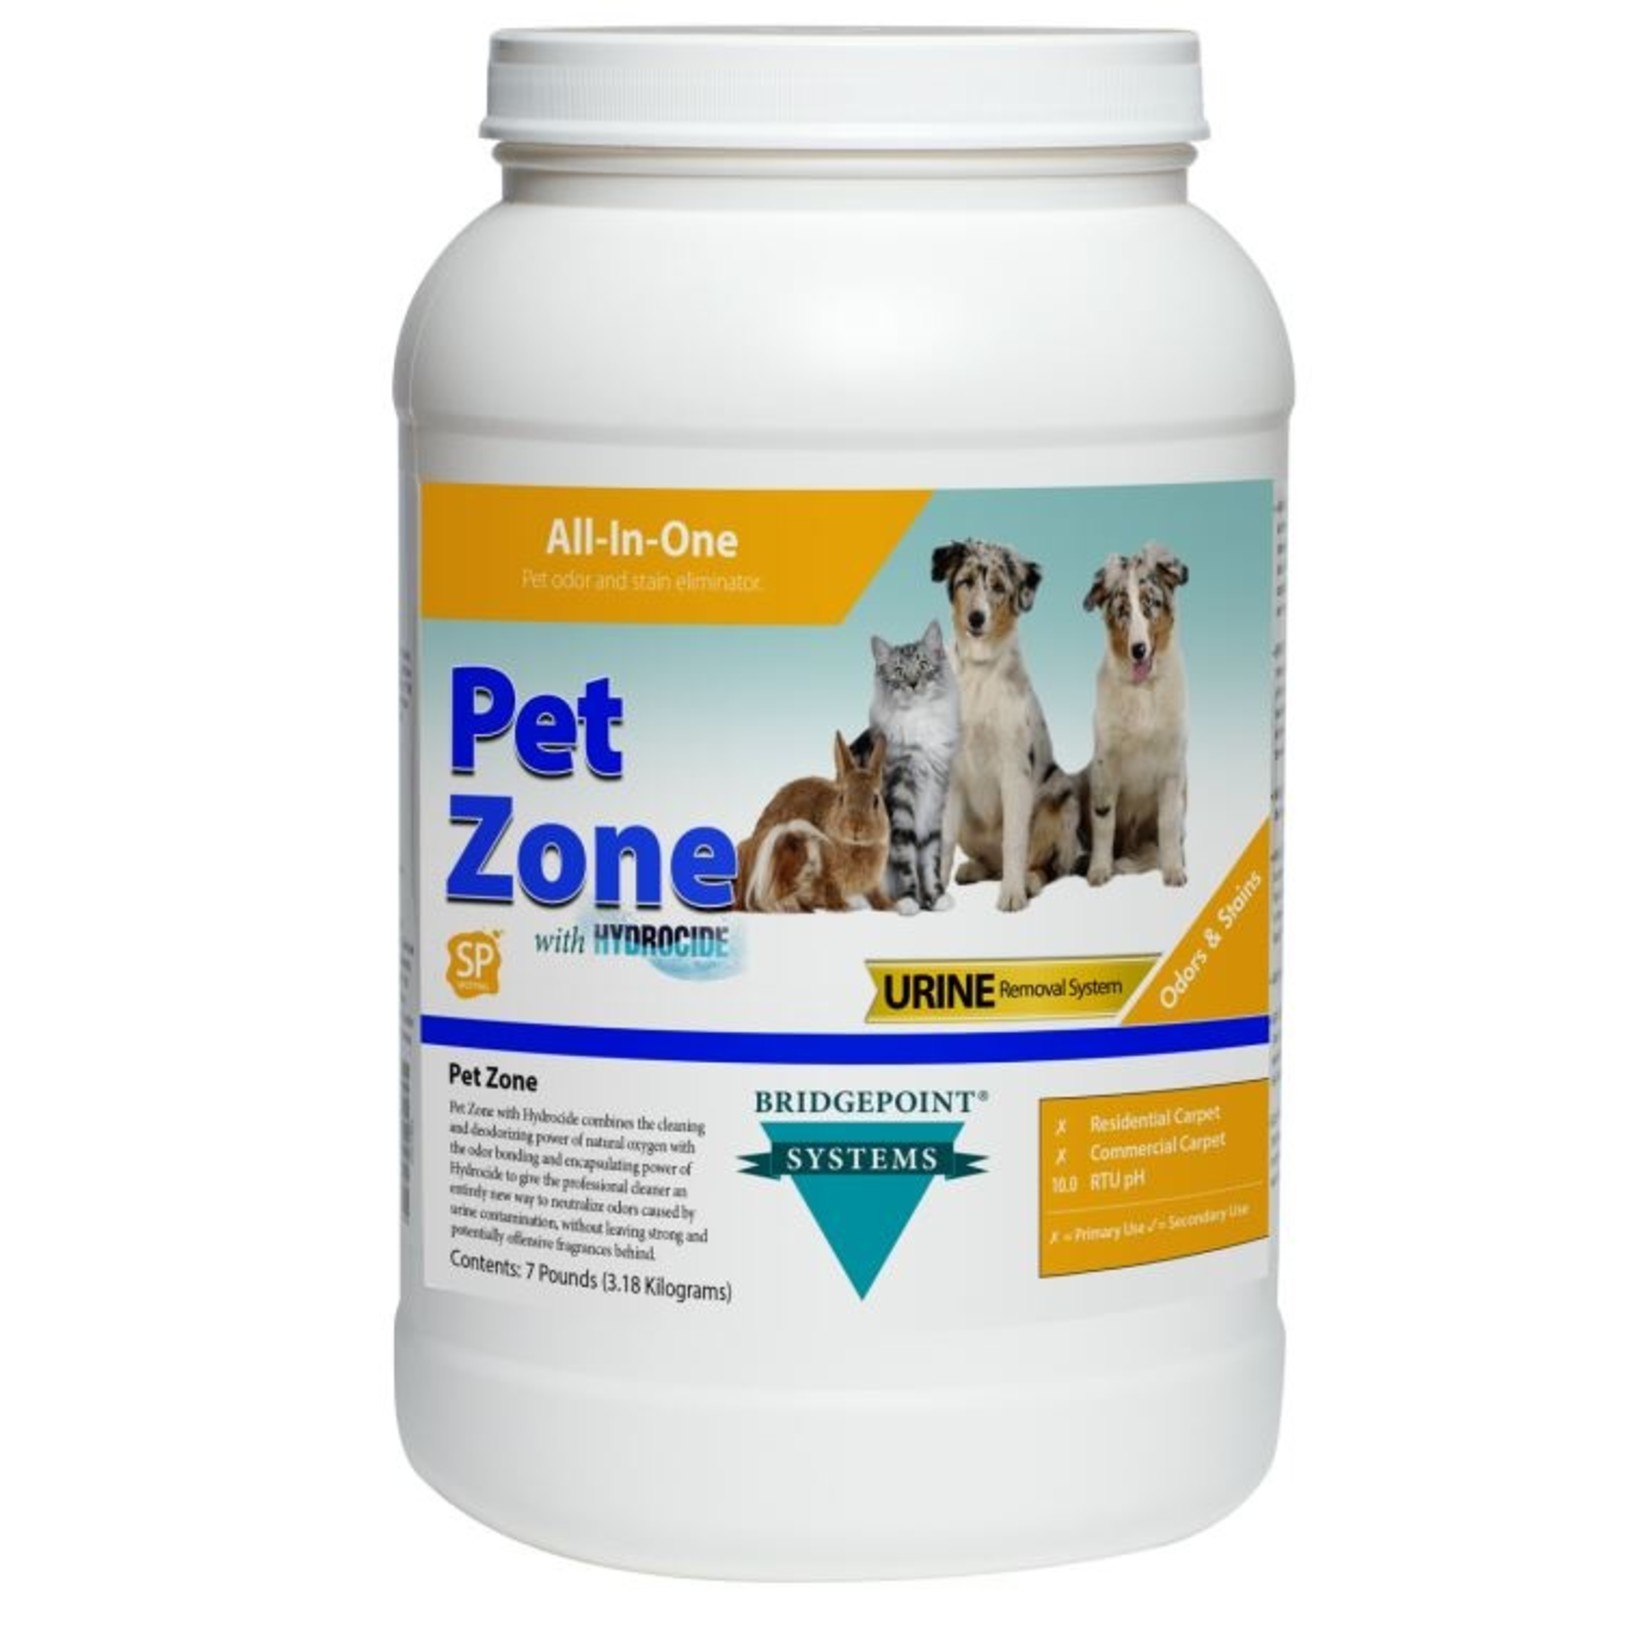 Bridgepoint Pet Zone with Hydrocide 7 lbs. [DISCONTINUED]